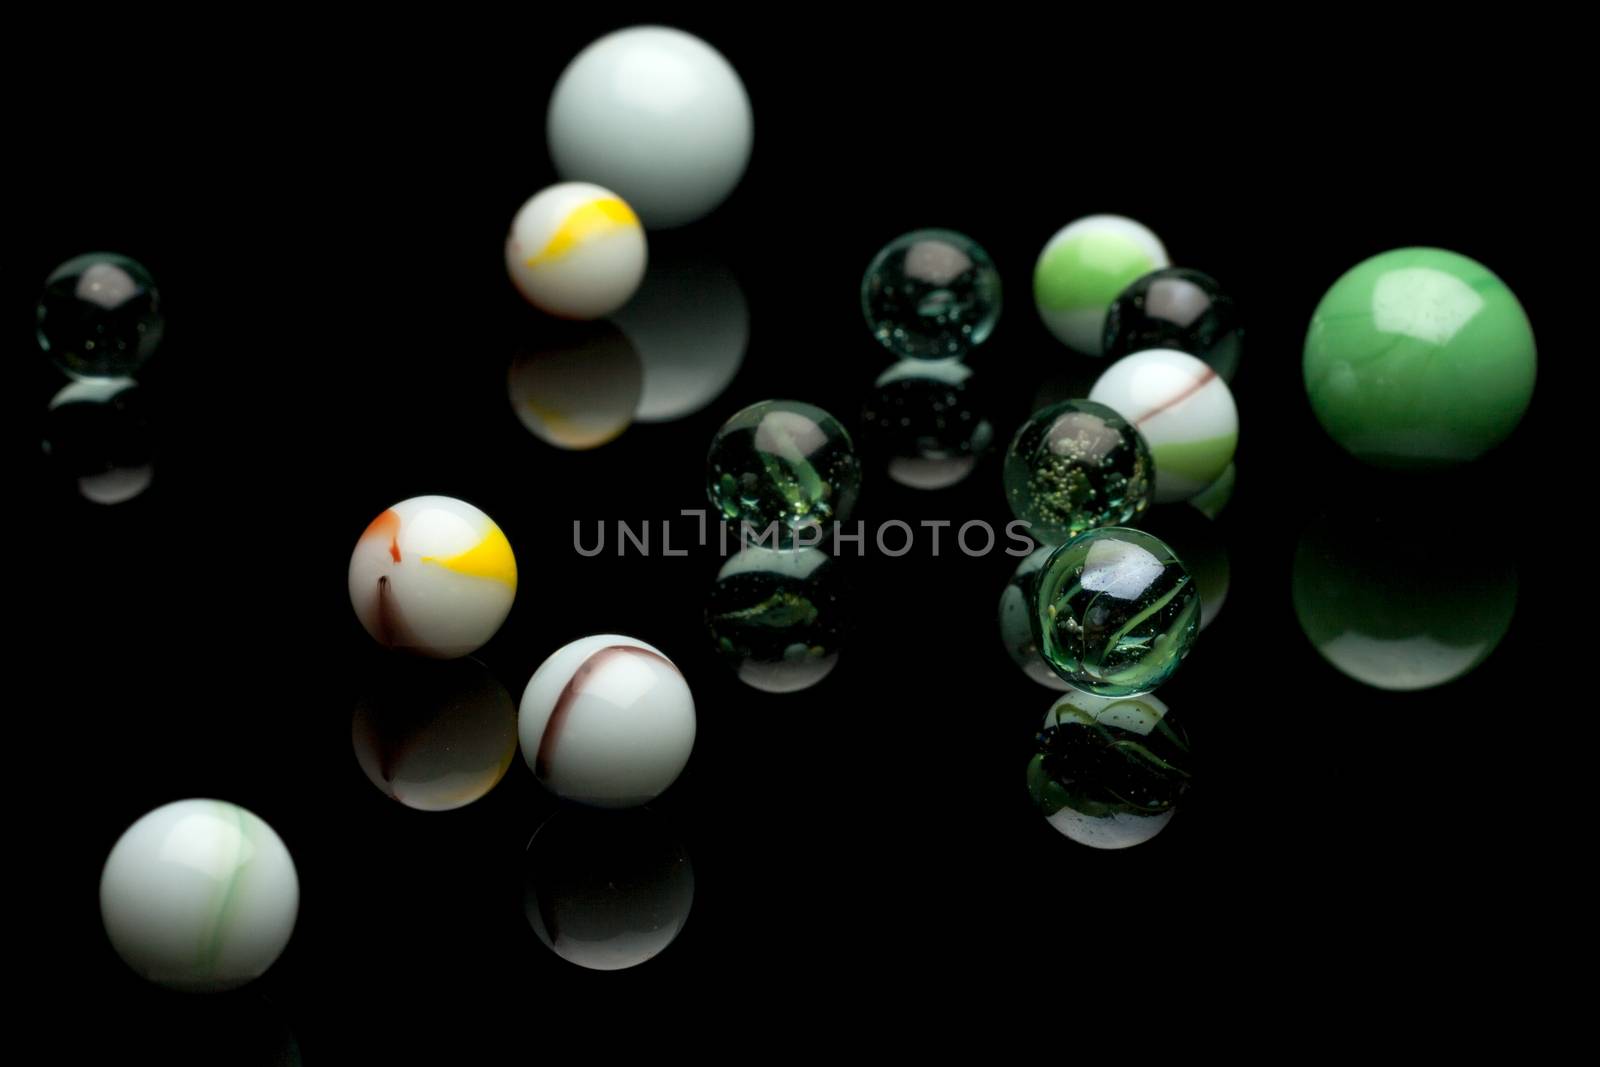 photo of color marbles on black with reflection